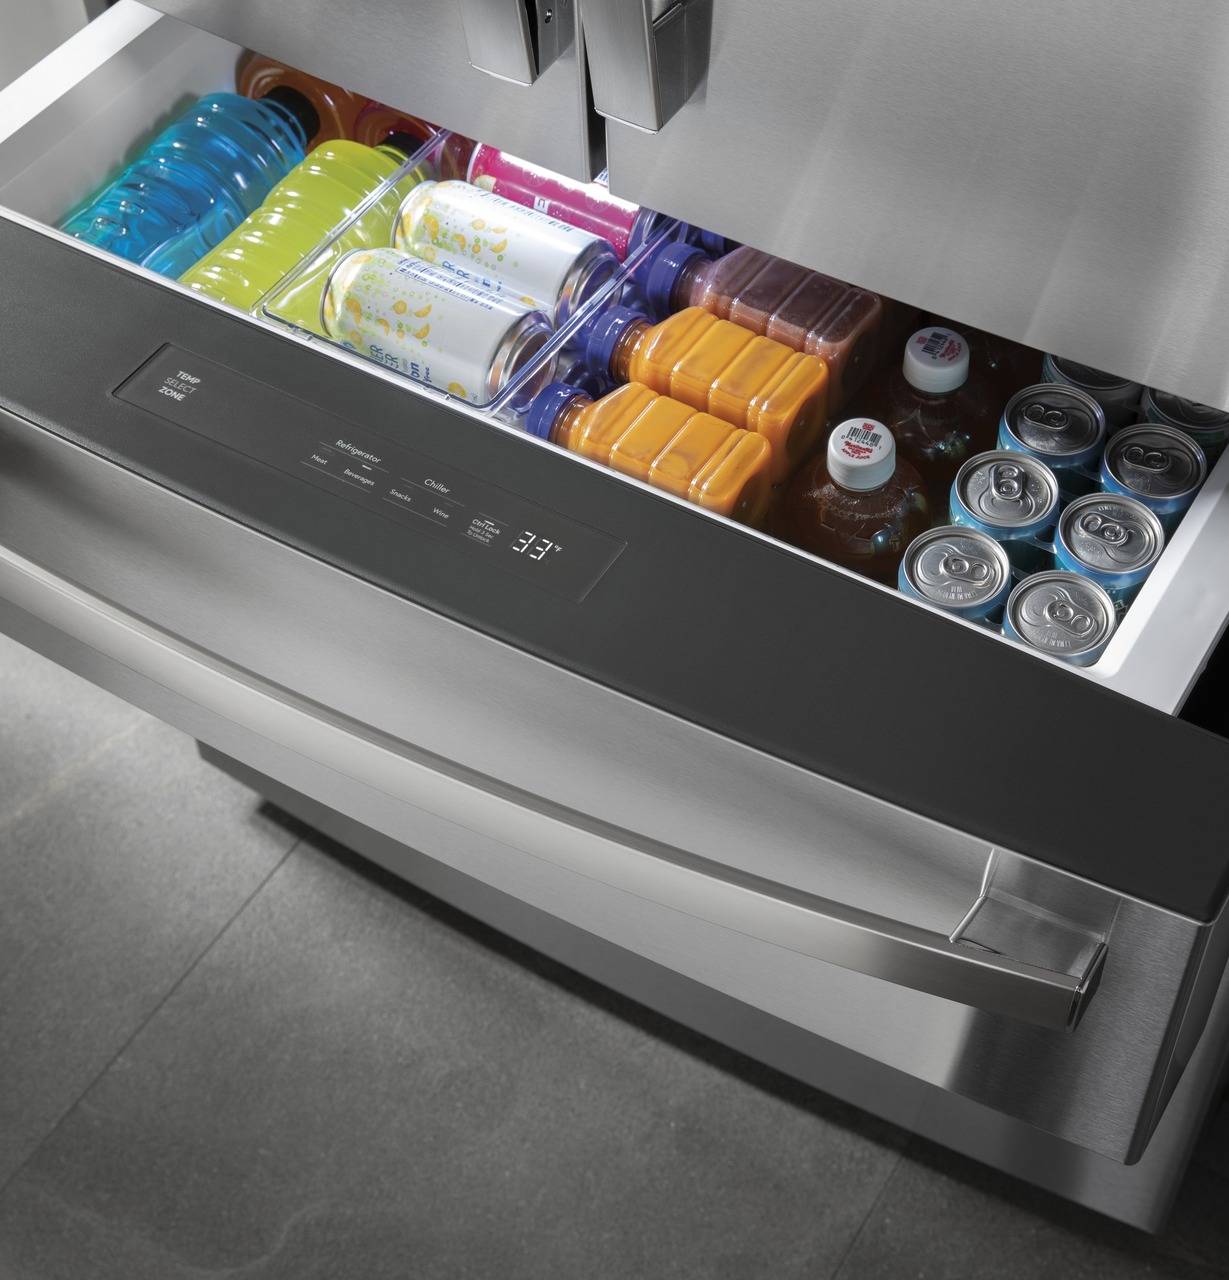 Adjustable temperature refrigerator drawer stocked with drinks.